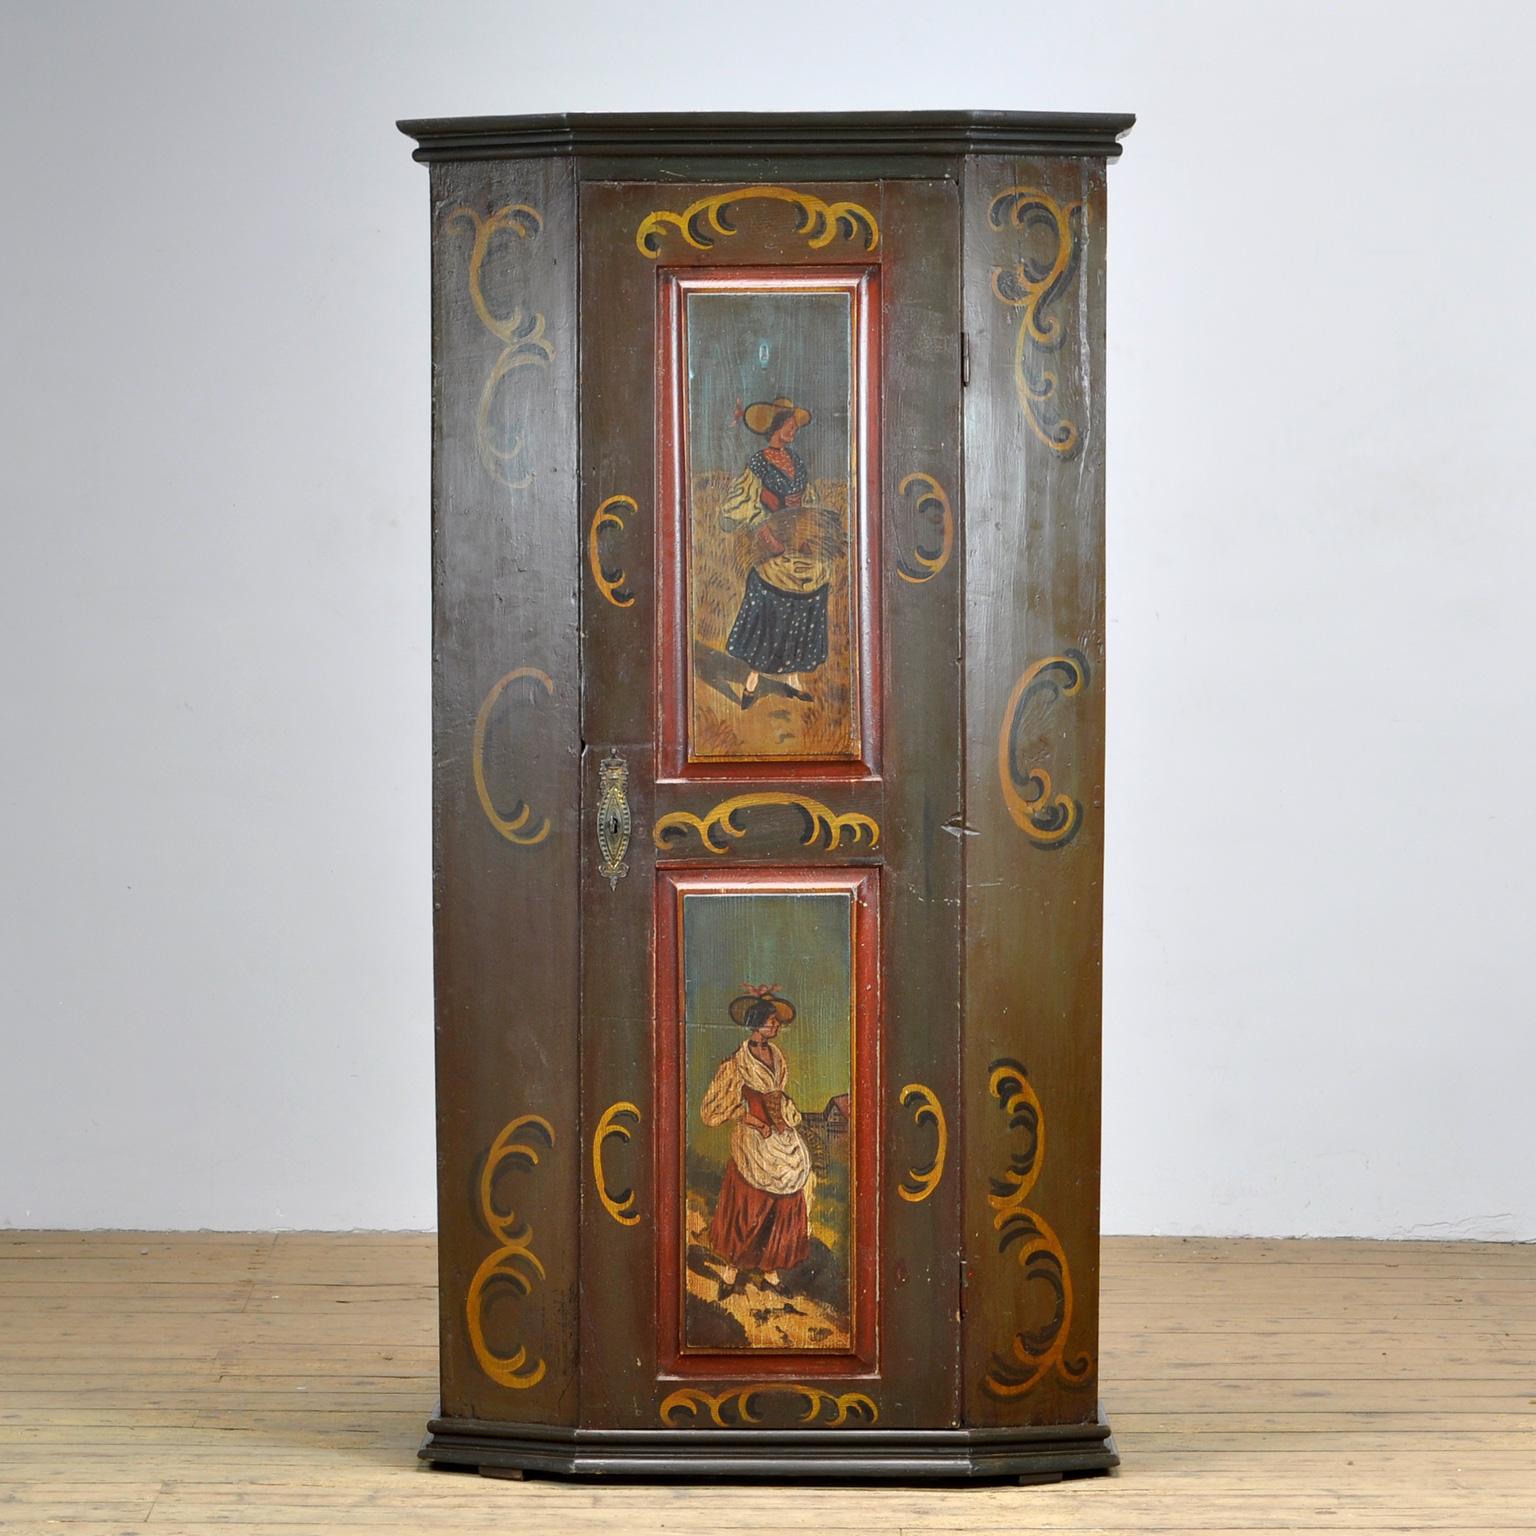 A beautiful cabinet from the rural south of germany, dating from circa 1850. The cabinet was probably given as a wedding present. This cabinet is made of solid pine and is hand painted in vibrant colors. 5 shelves inside. The cabinet is in good